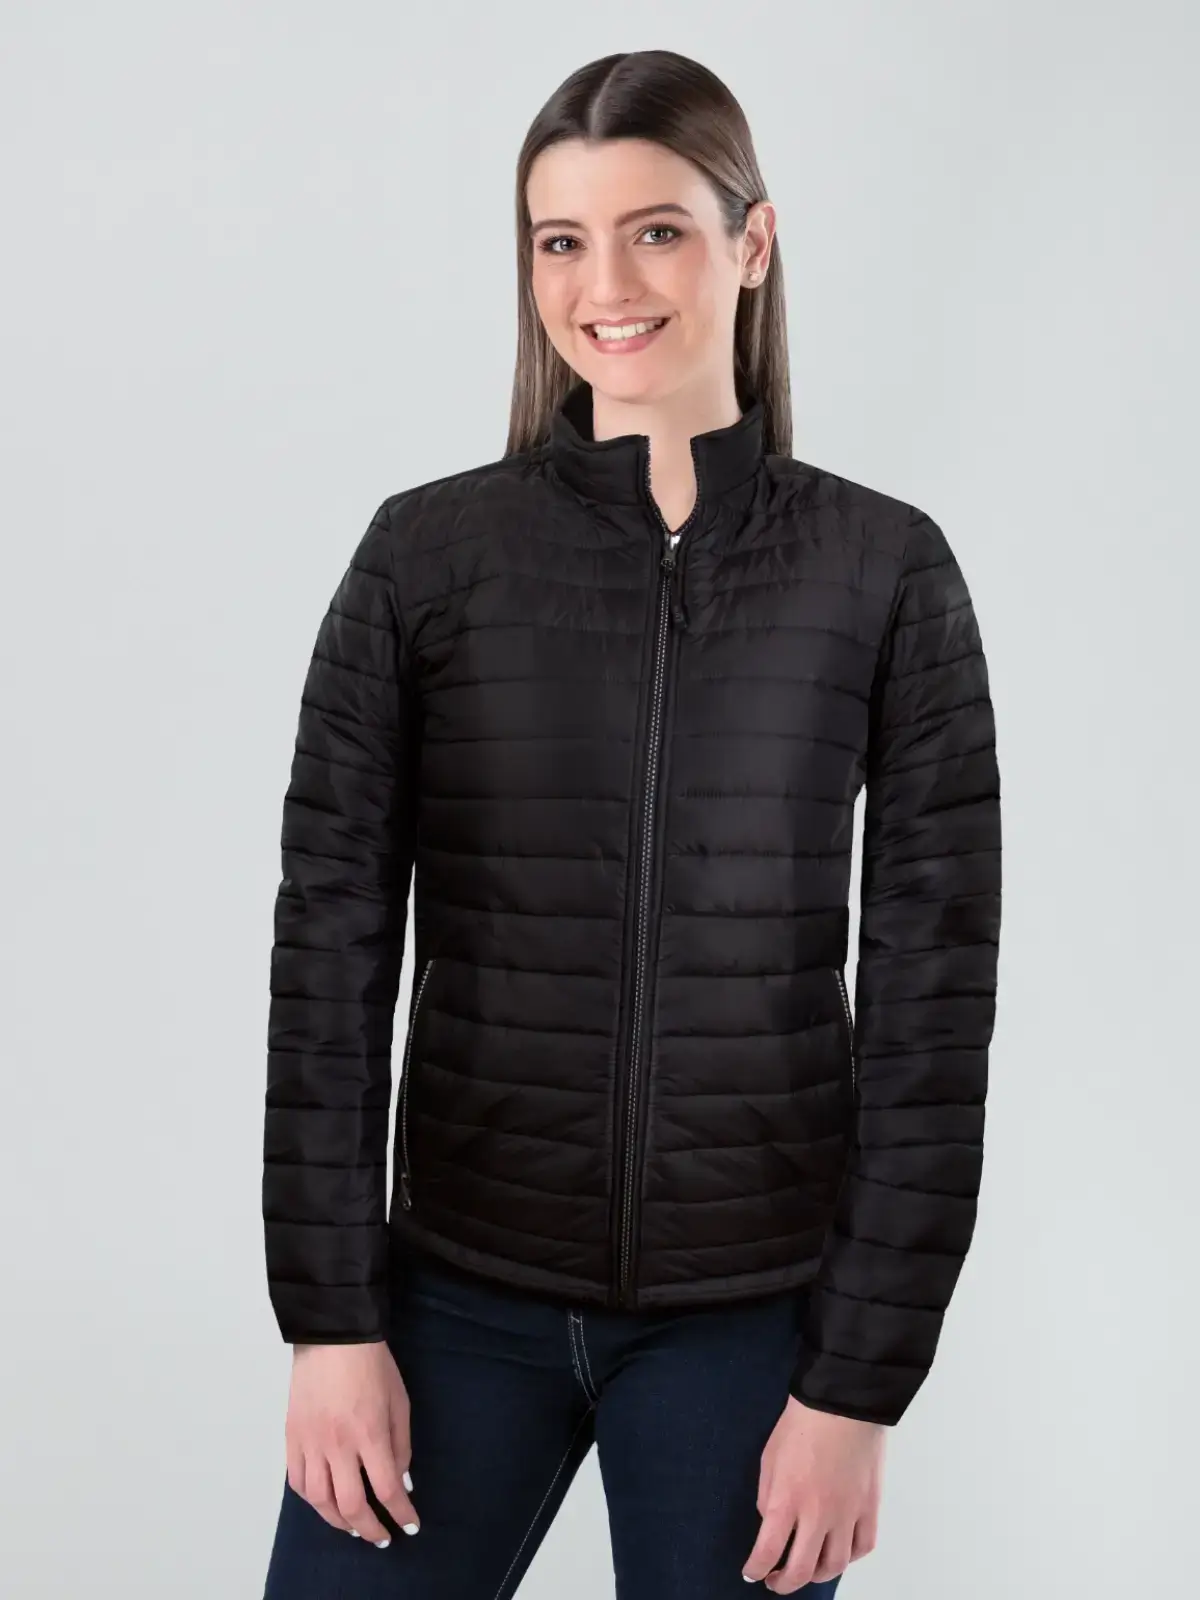 Corporate Work Jacket Woman in Texas, Lazzar